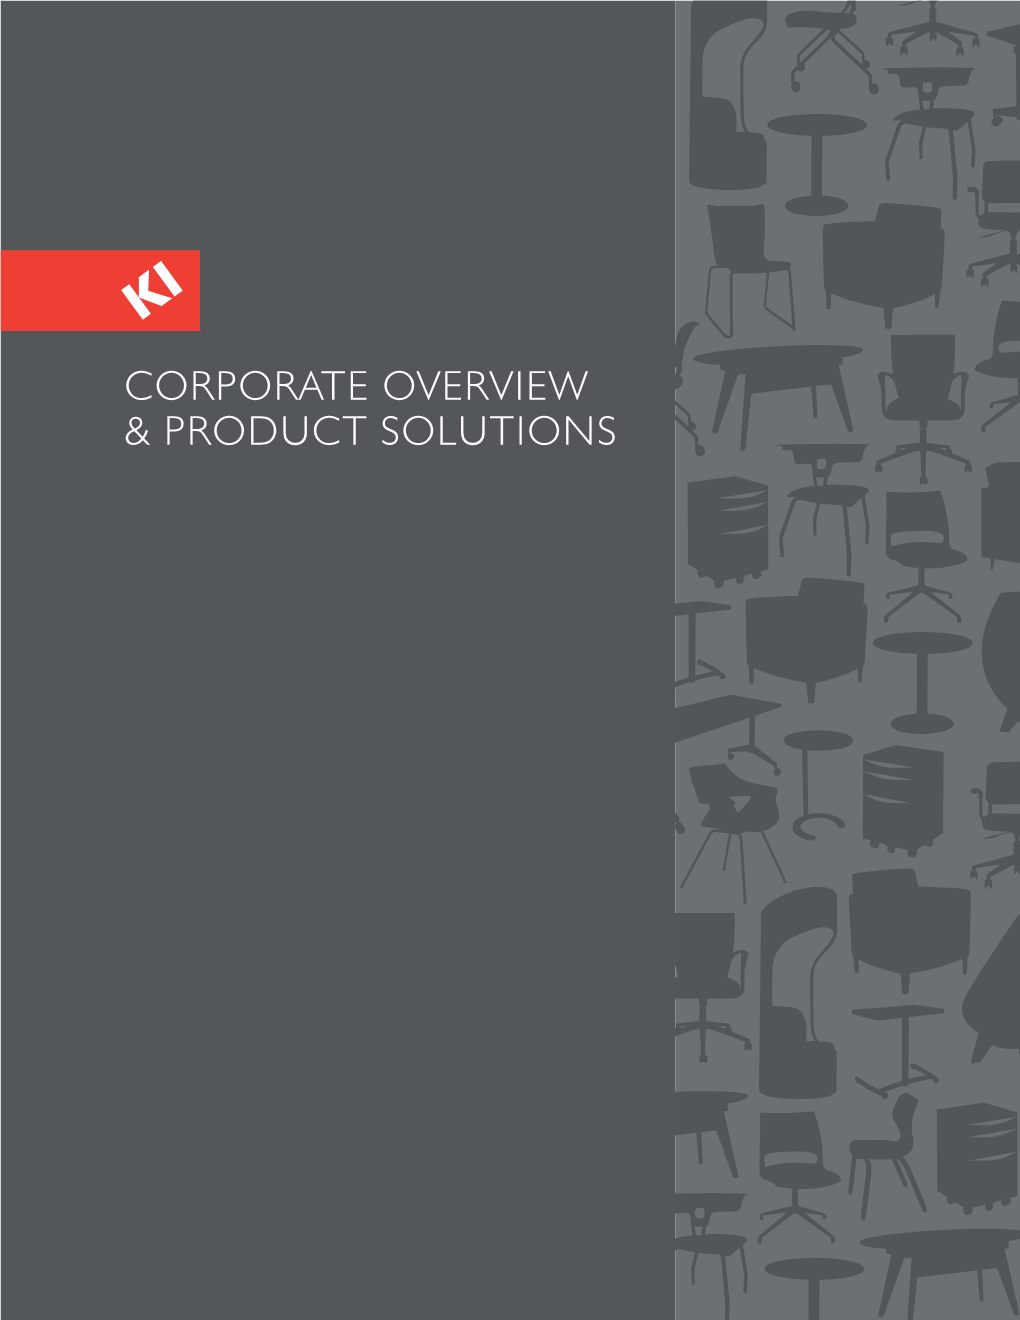 Corporate Overview & Product Solutions